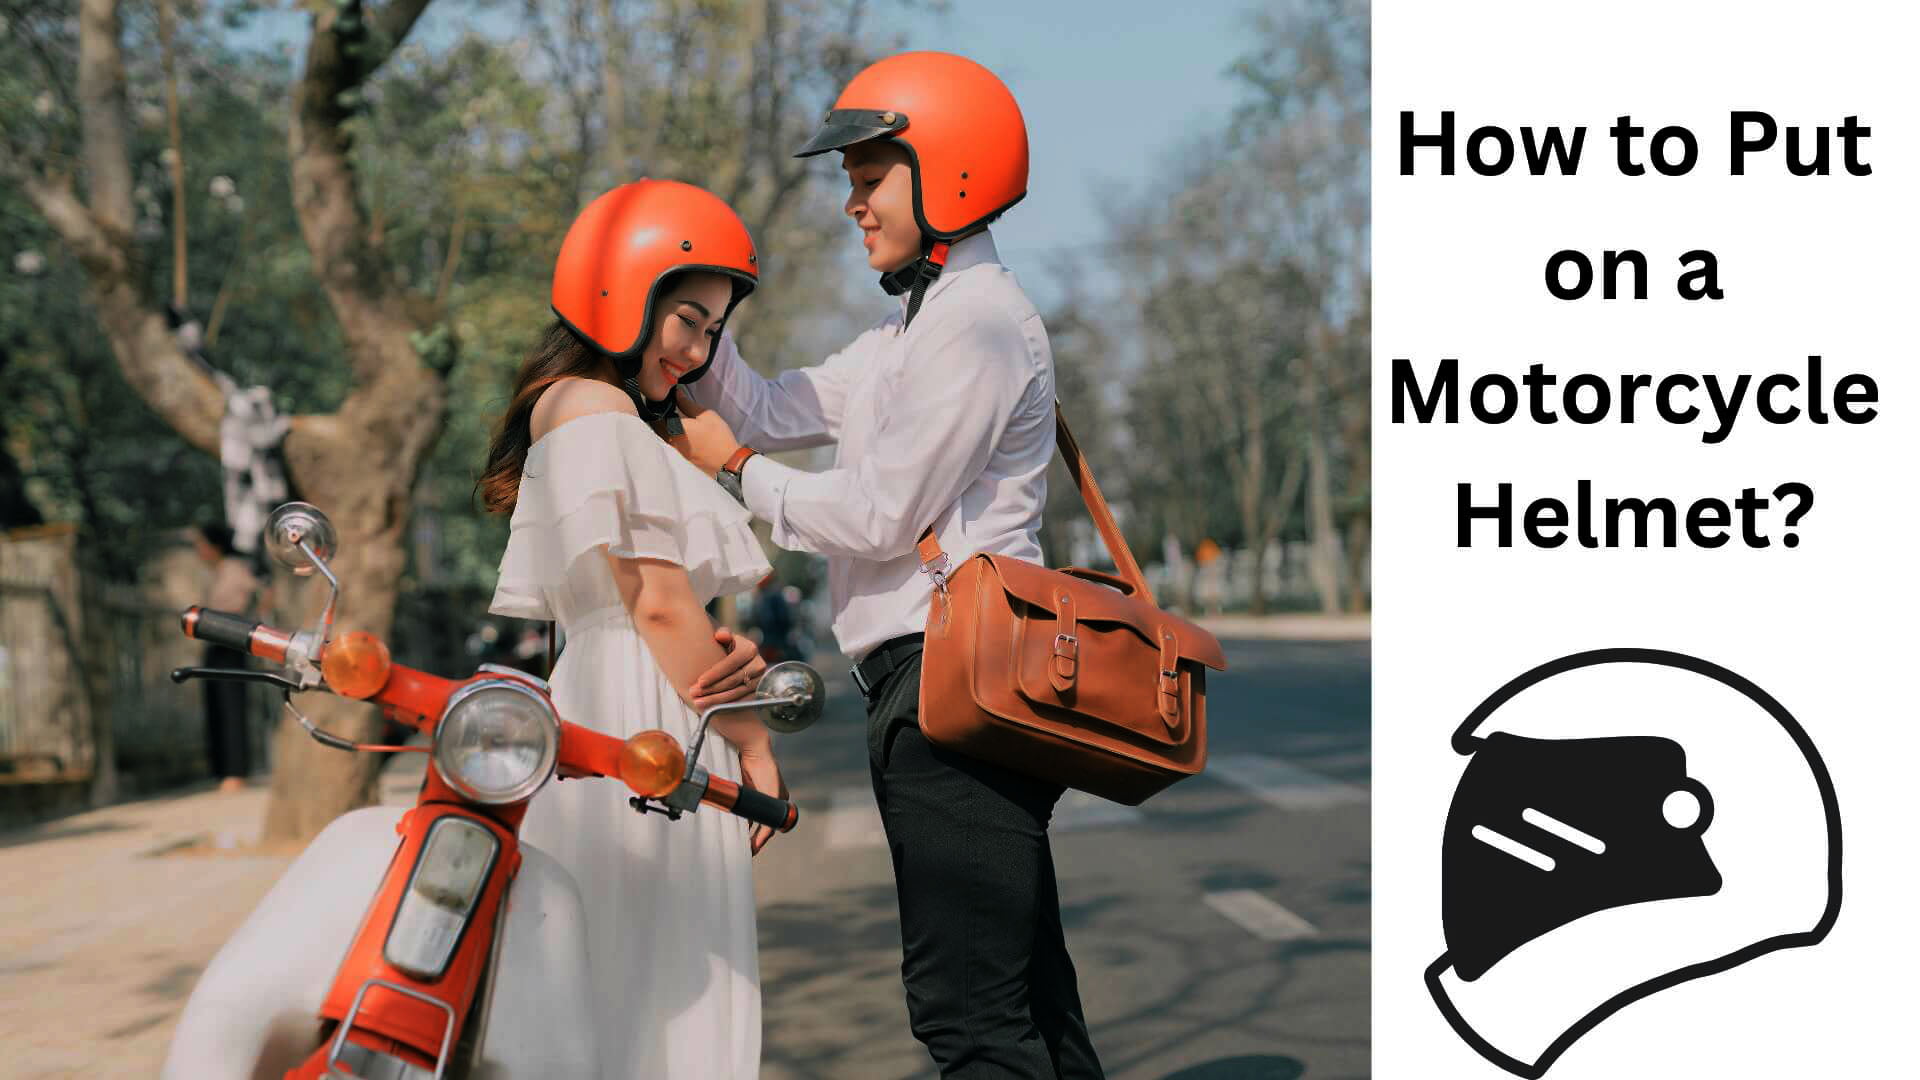 How To Put On a Motorcycle Helmet Safely And Properly?